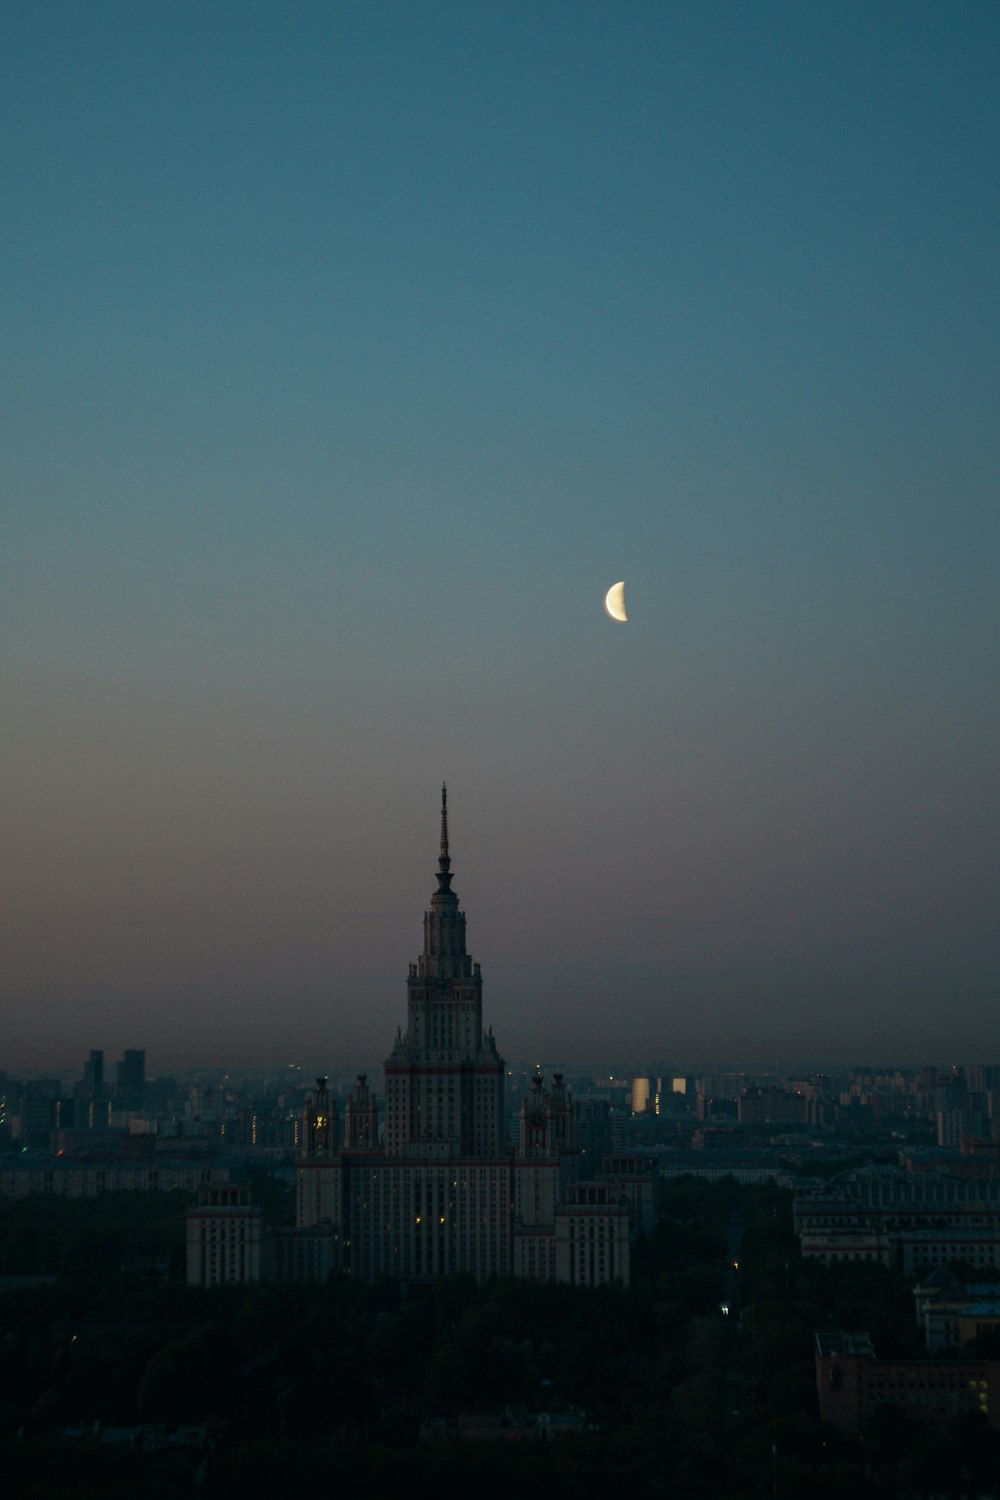 a view of a city with a half moon in the sky